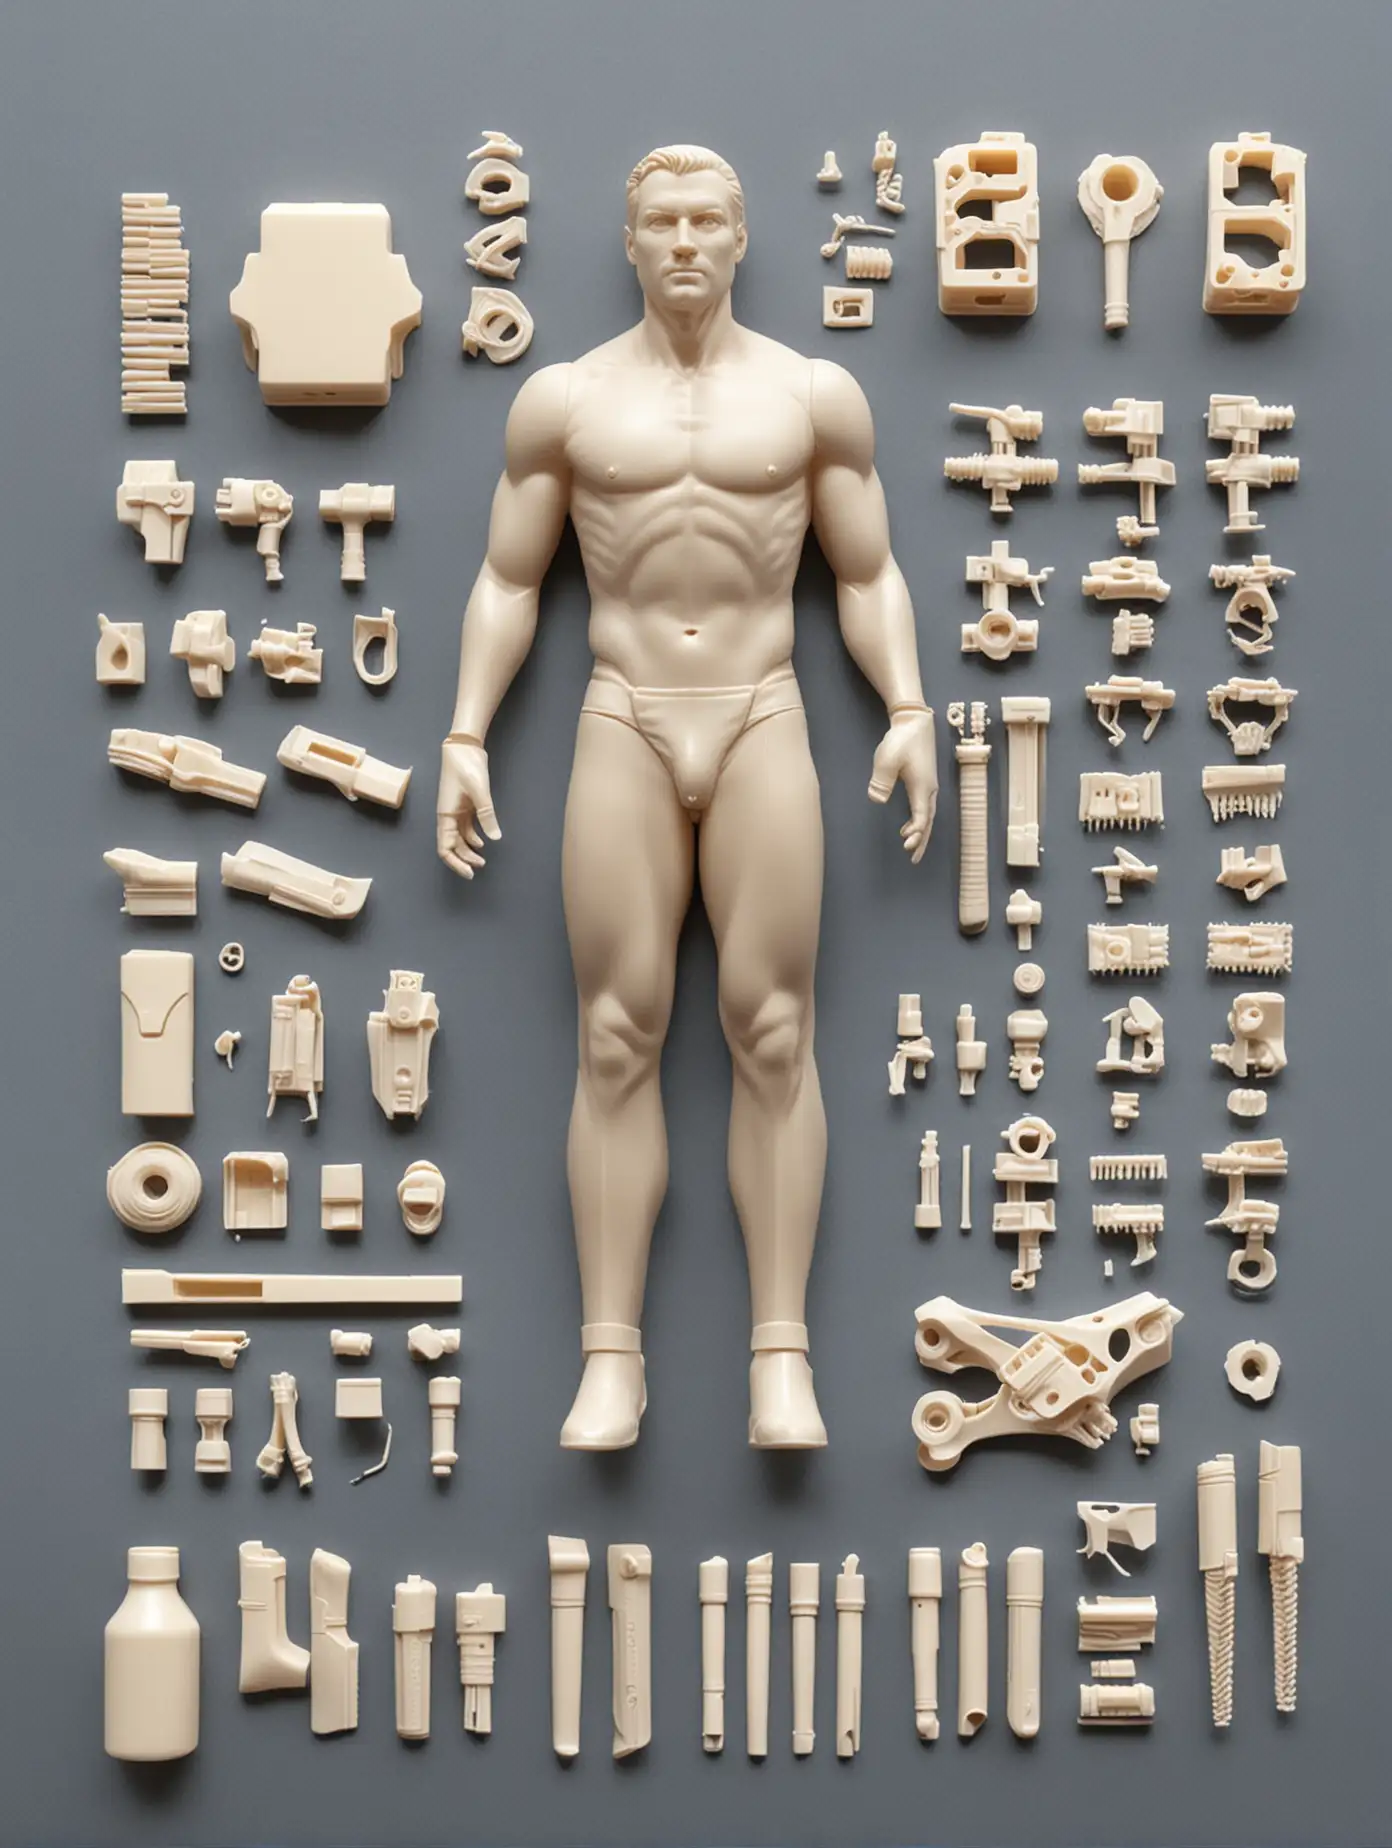 Assembly Kit for Creating a Generic Male Figure